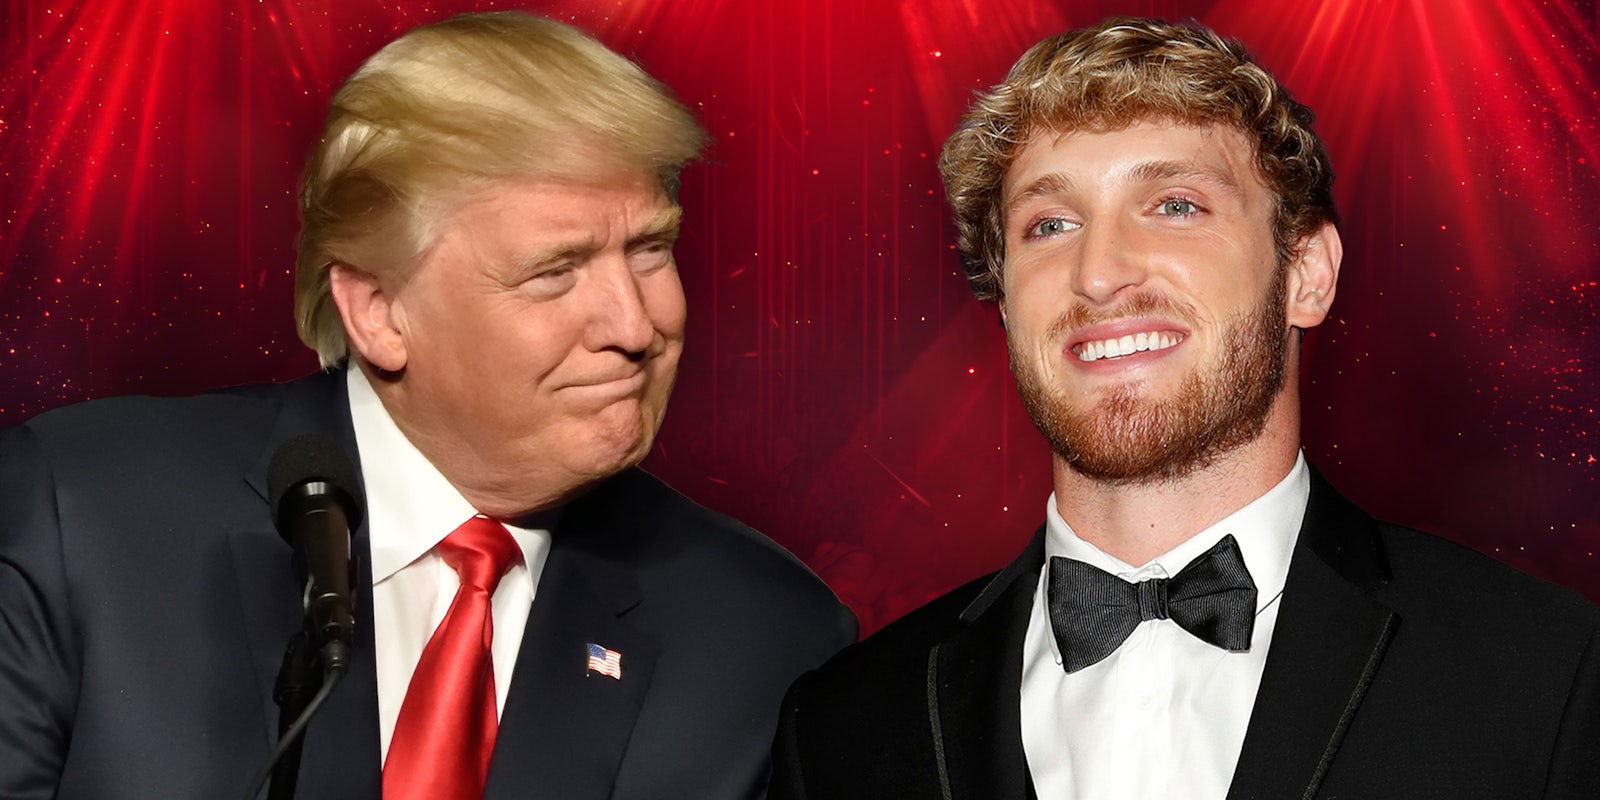 Trump's appearance on Logan Paul's podcast revives height question